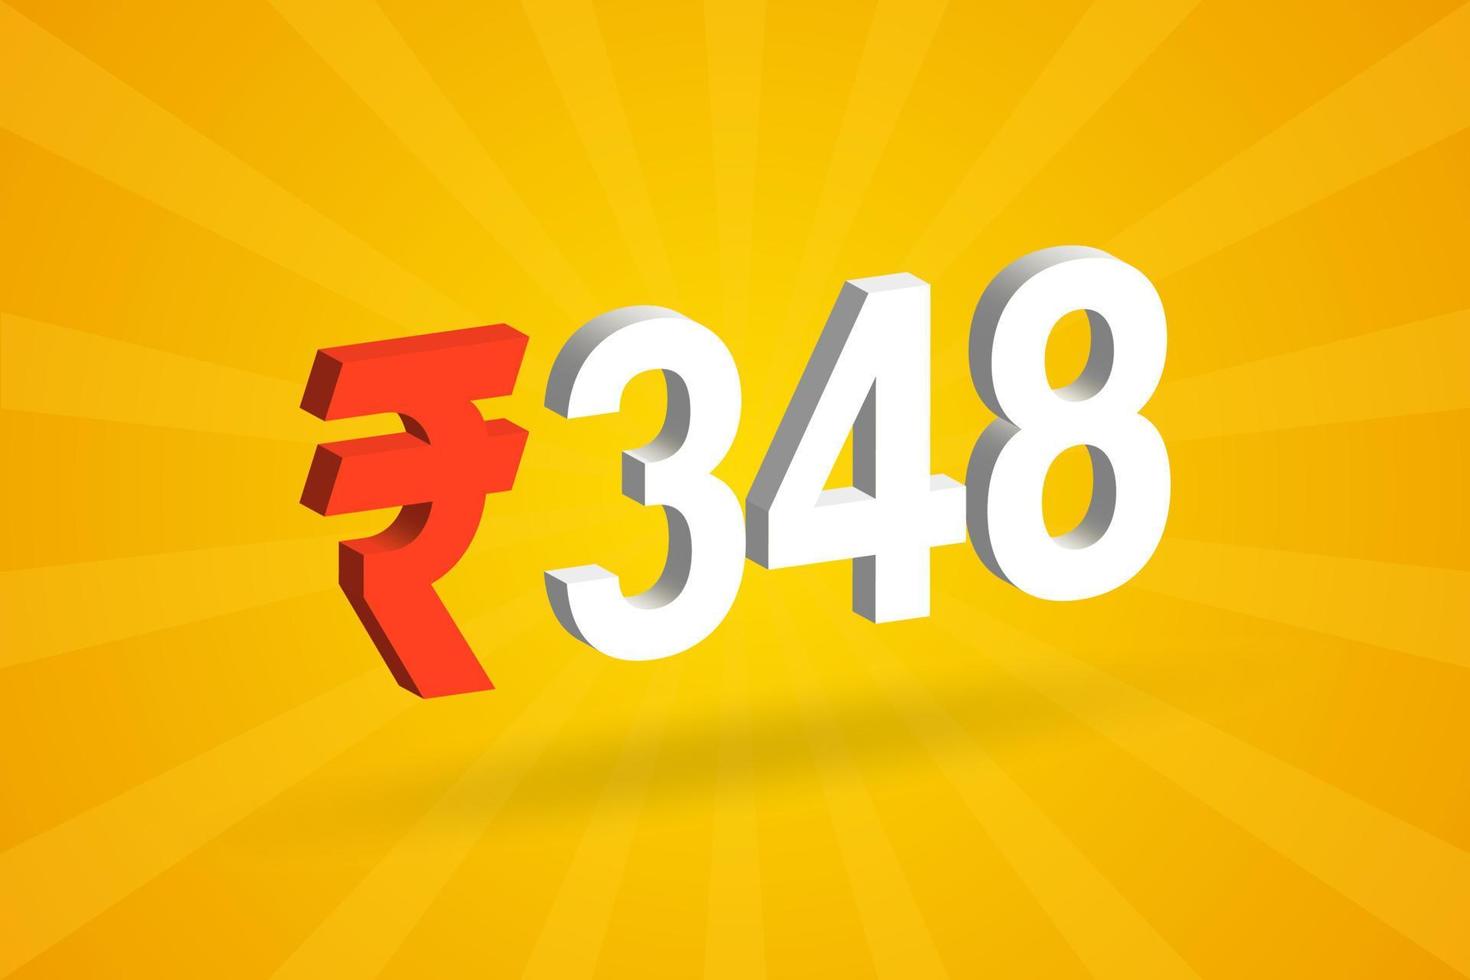 348 Rupee 3D symbol bold text vector image. 3D 348 Indian Rupee currency sign vector illustration